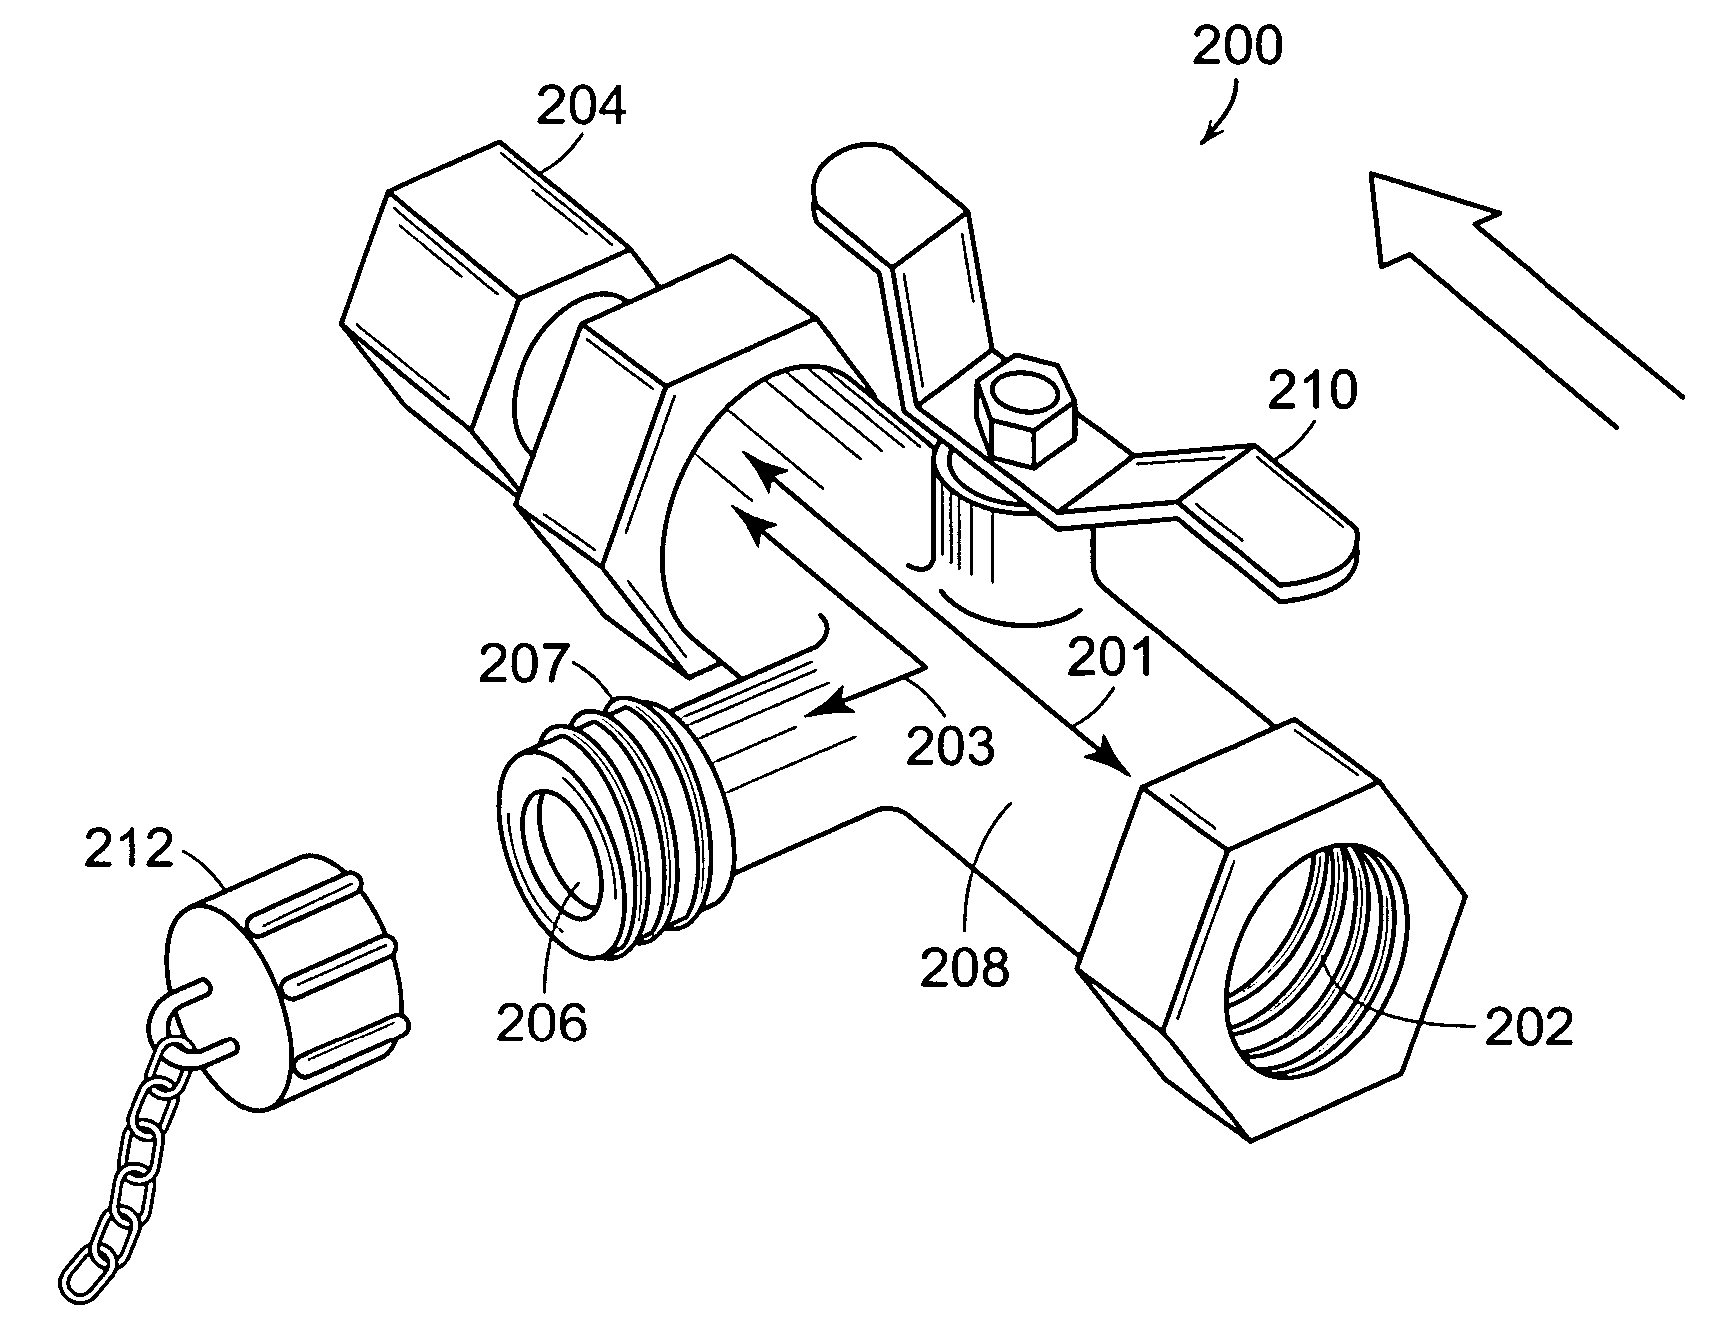 Isolation valve with integral pressure relief